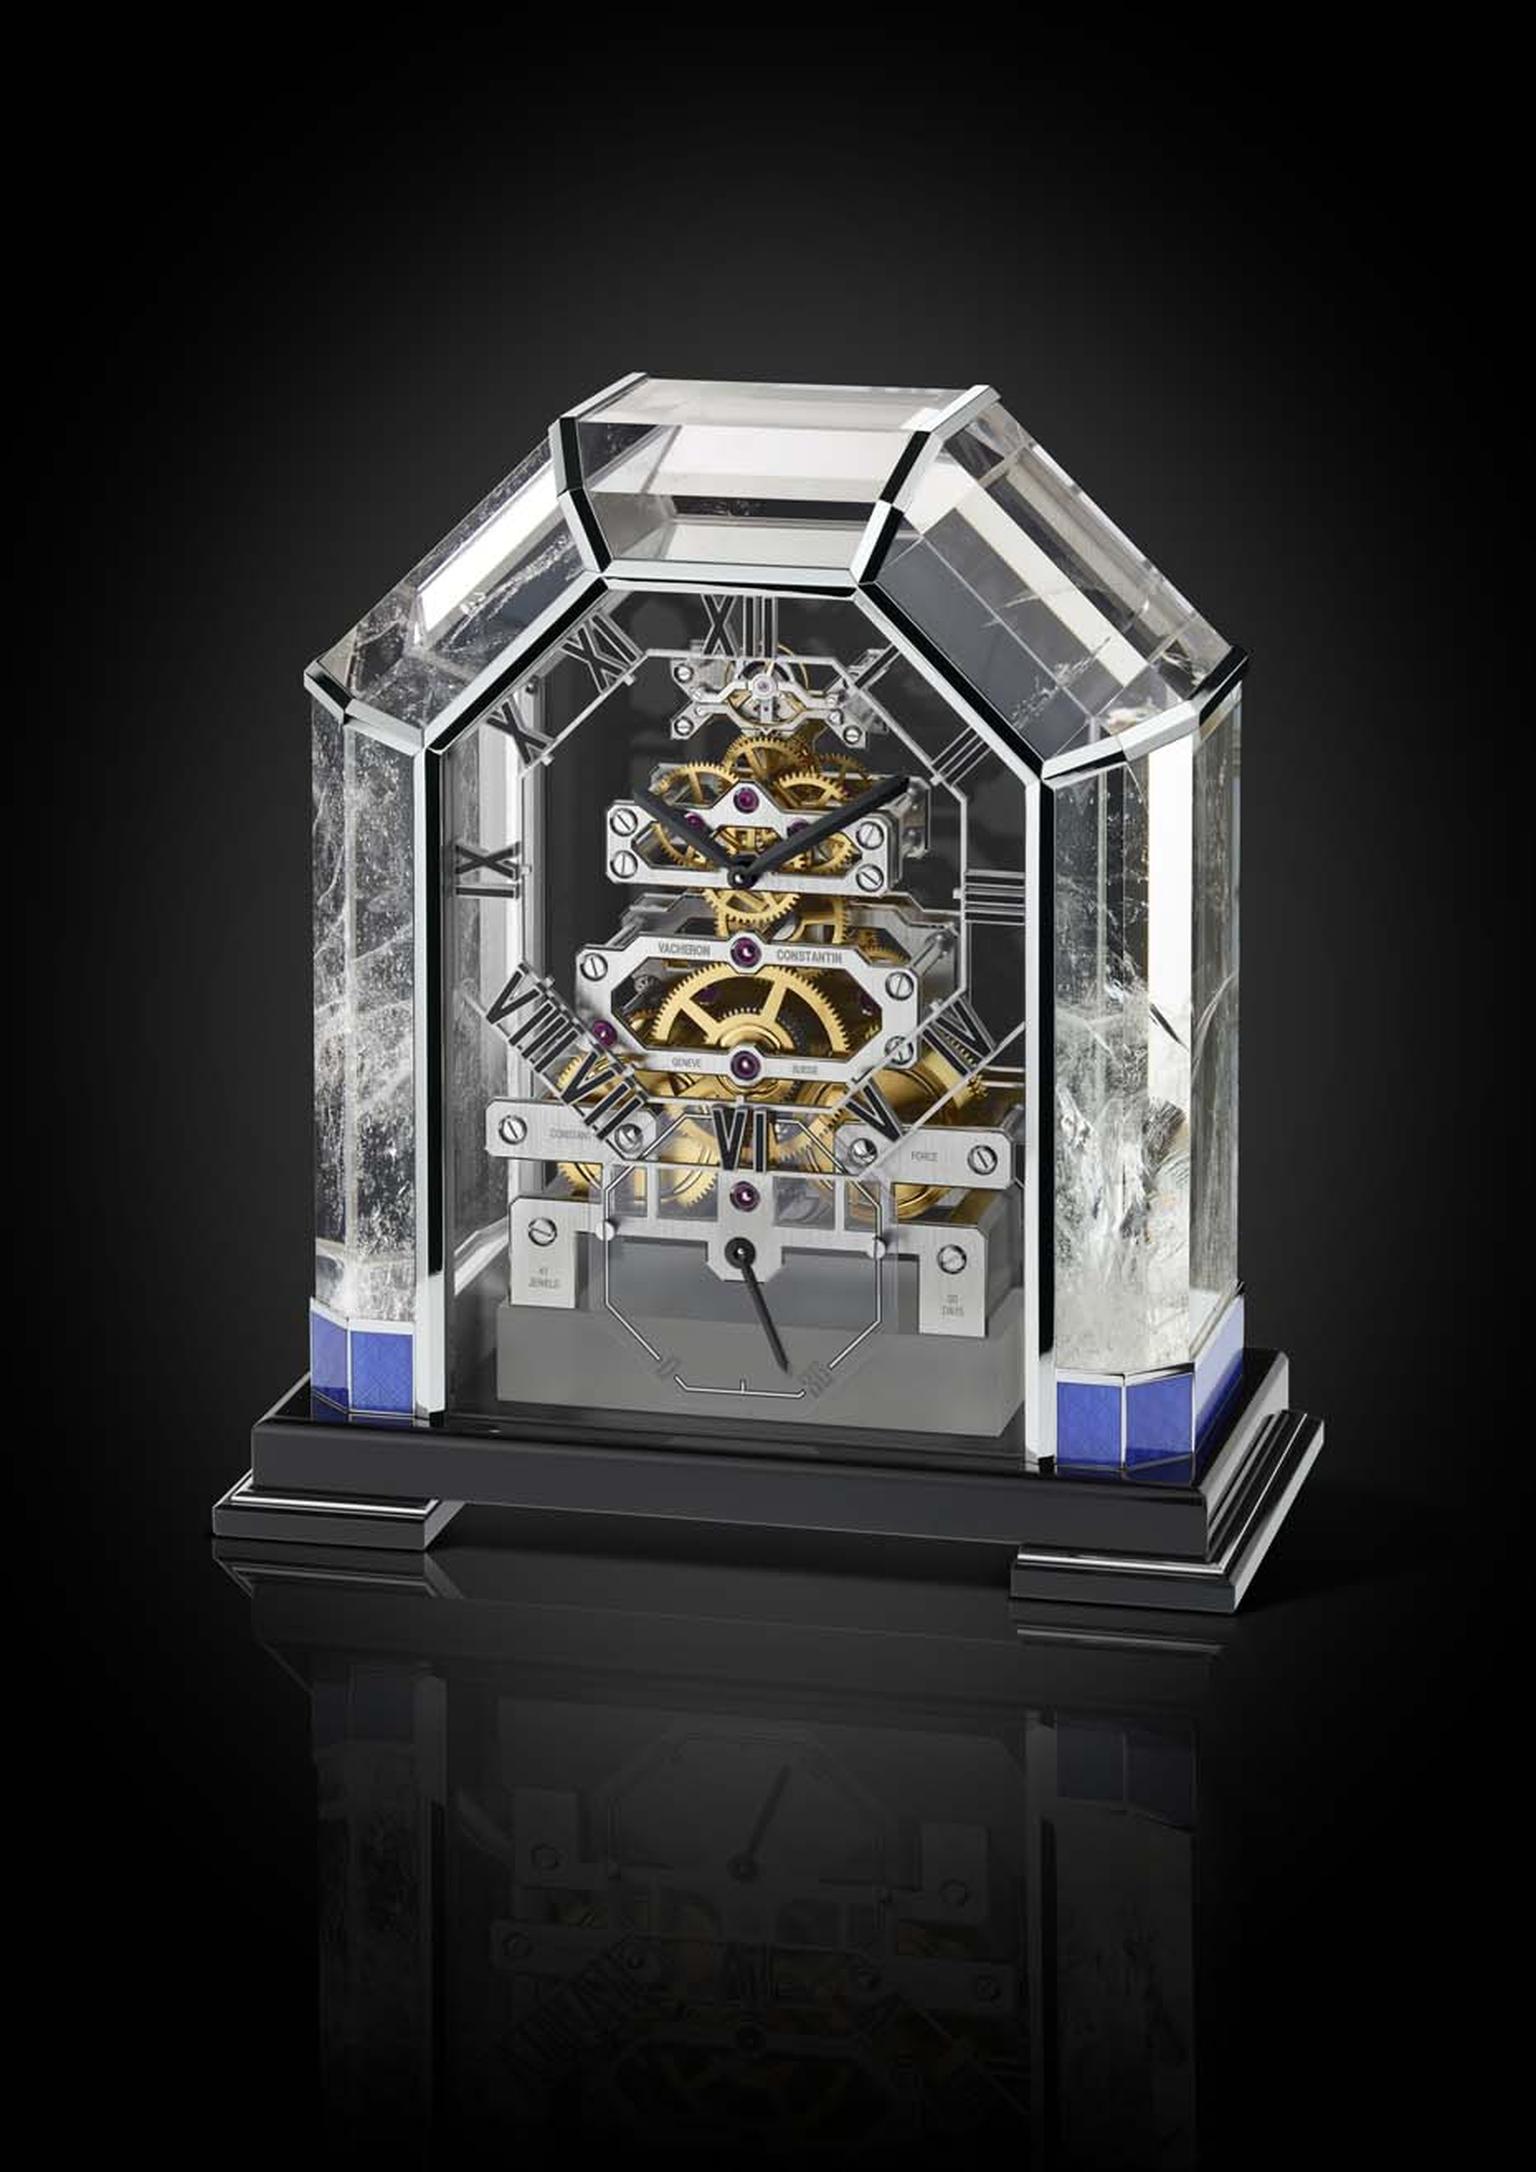 Vacheron Constantin has revisited one of its Art Deco table clocks from 1933 this year with the Arca, a unique and beautifully crafted clock made from rock crystal.